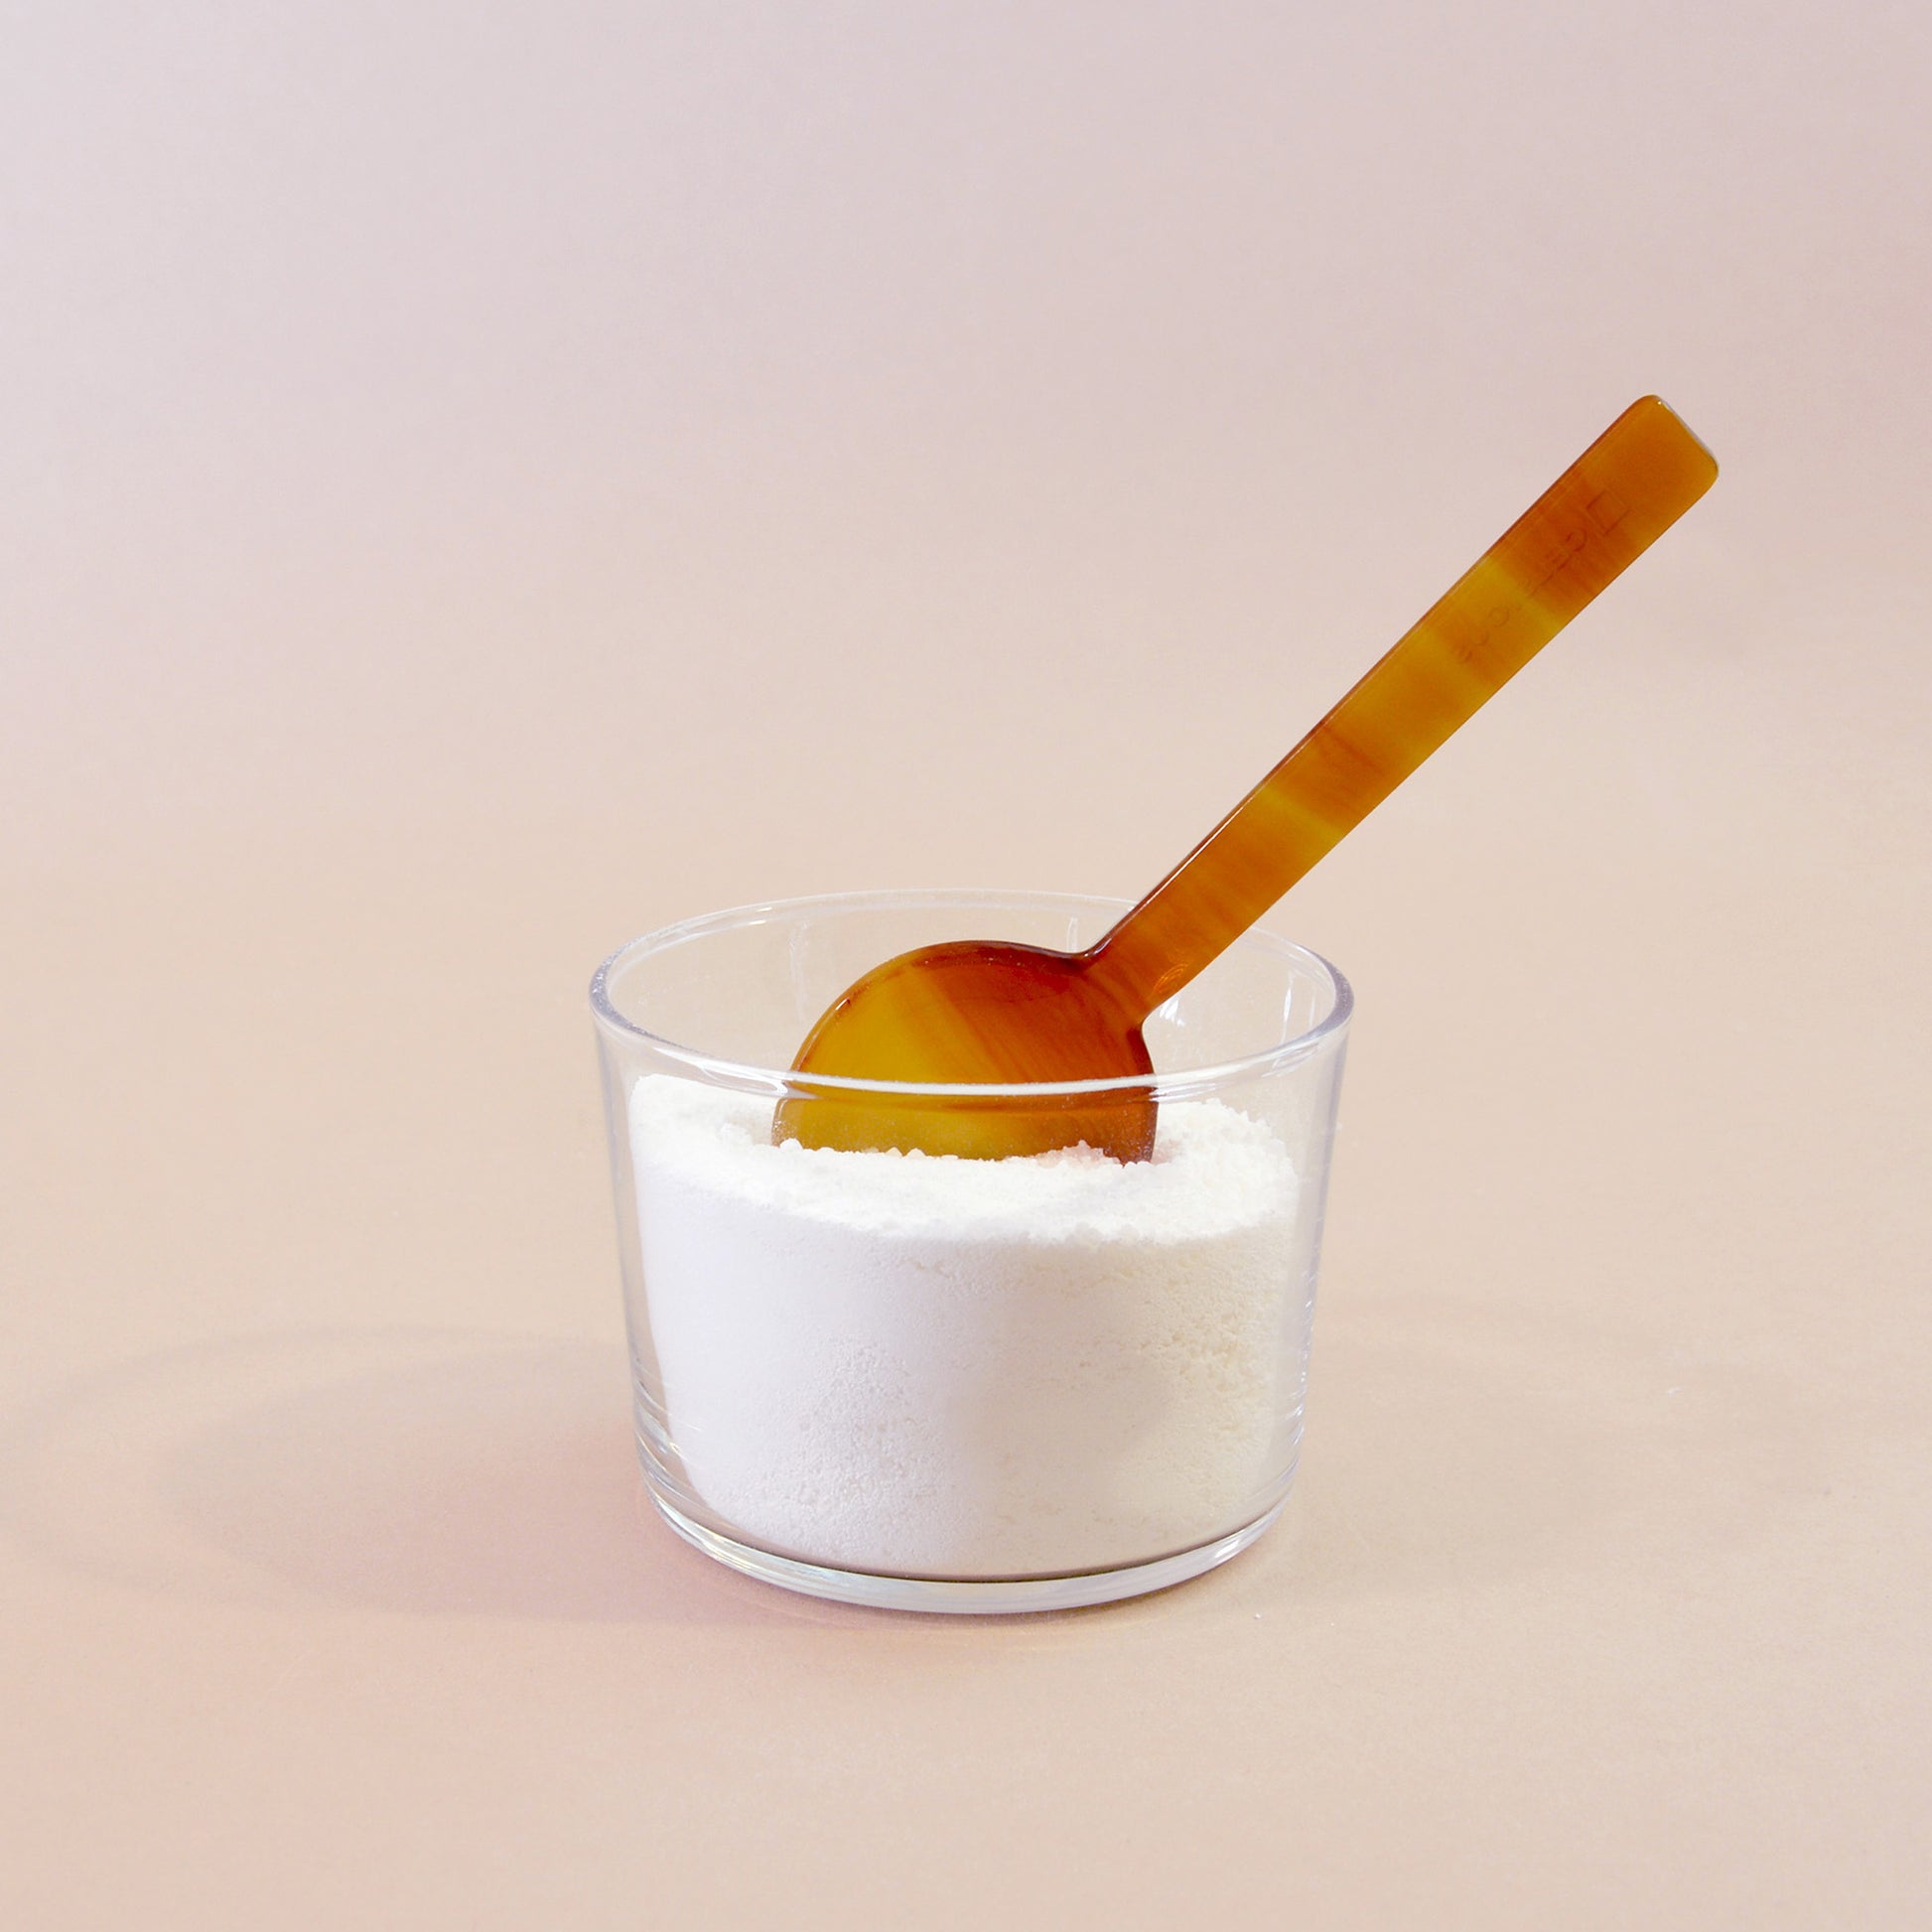 Celsious Cellulose Spoon